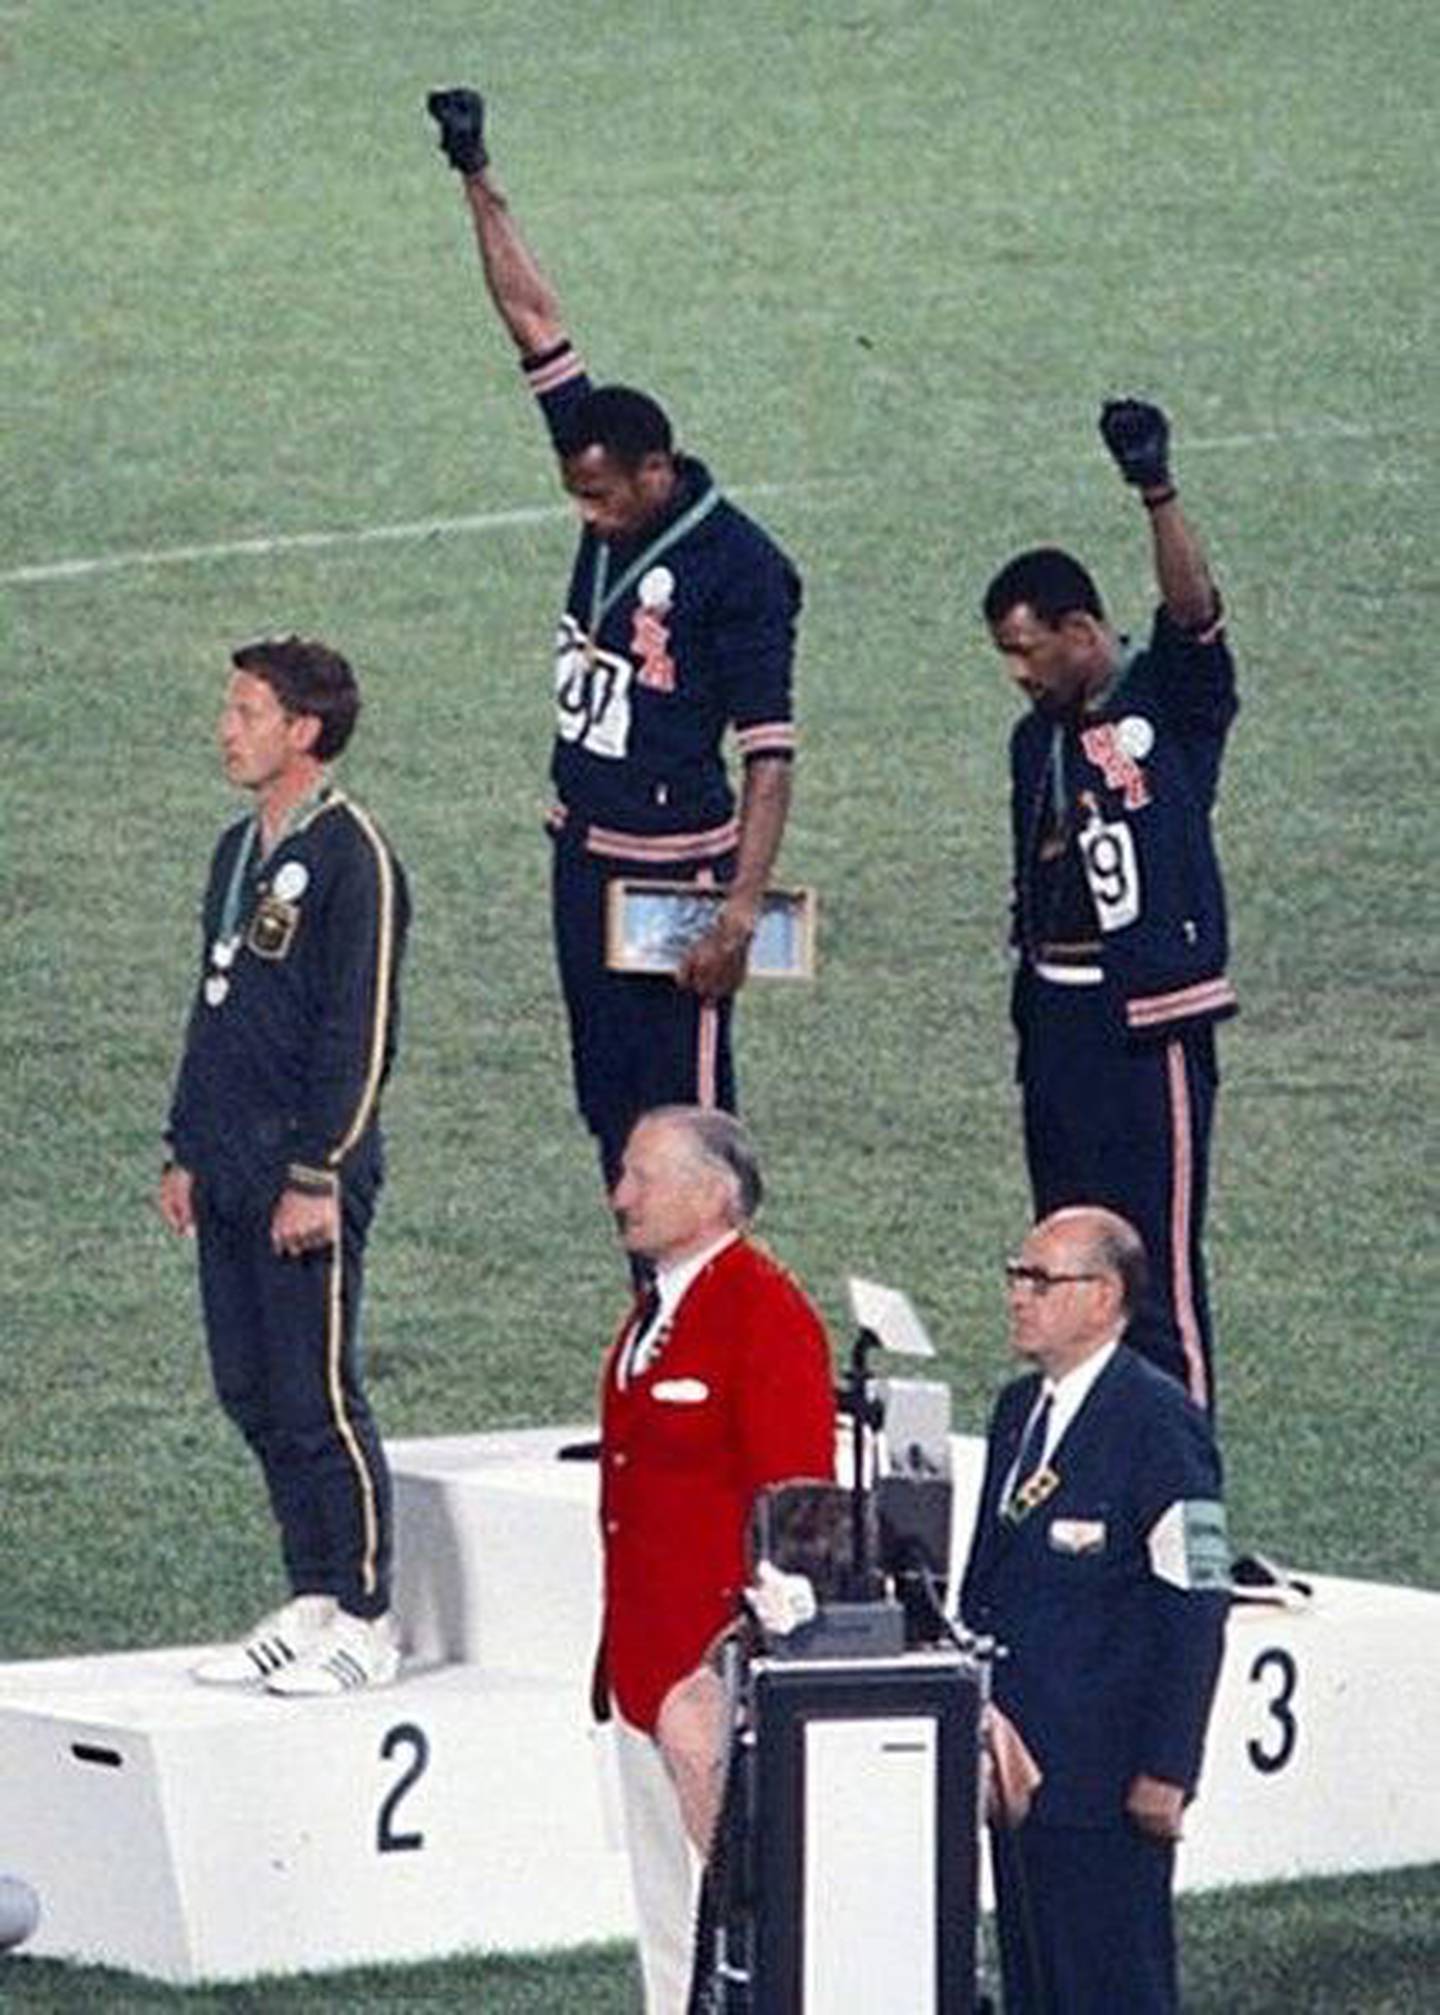 At the 1968 Mexico Olympics America athletes Tommie Smith and John Carlos gave a Black Panther salute. A single Puma Suede shoe can be seen on the podium. Courtesy Peter Norman